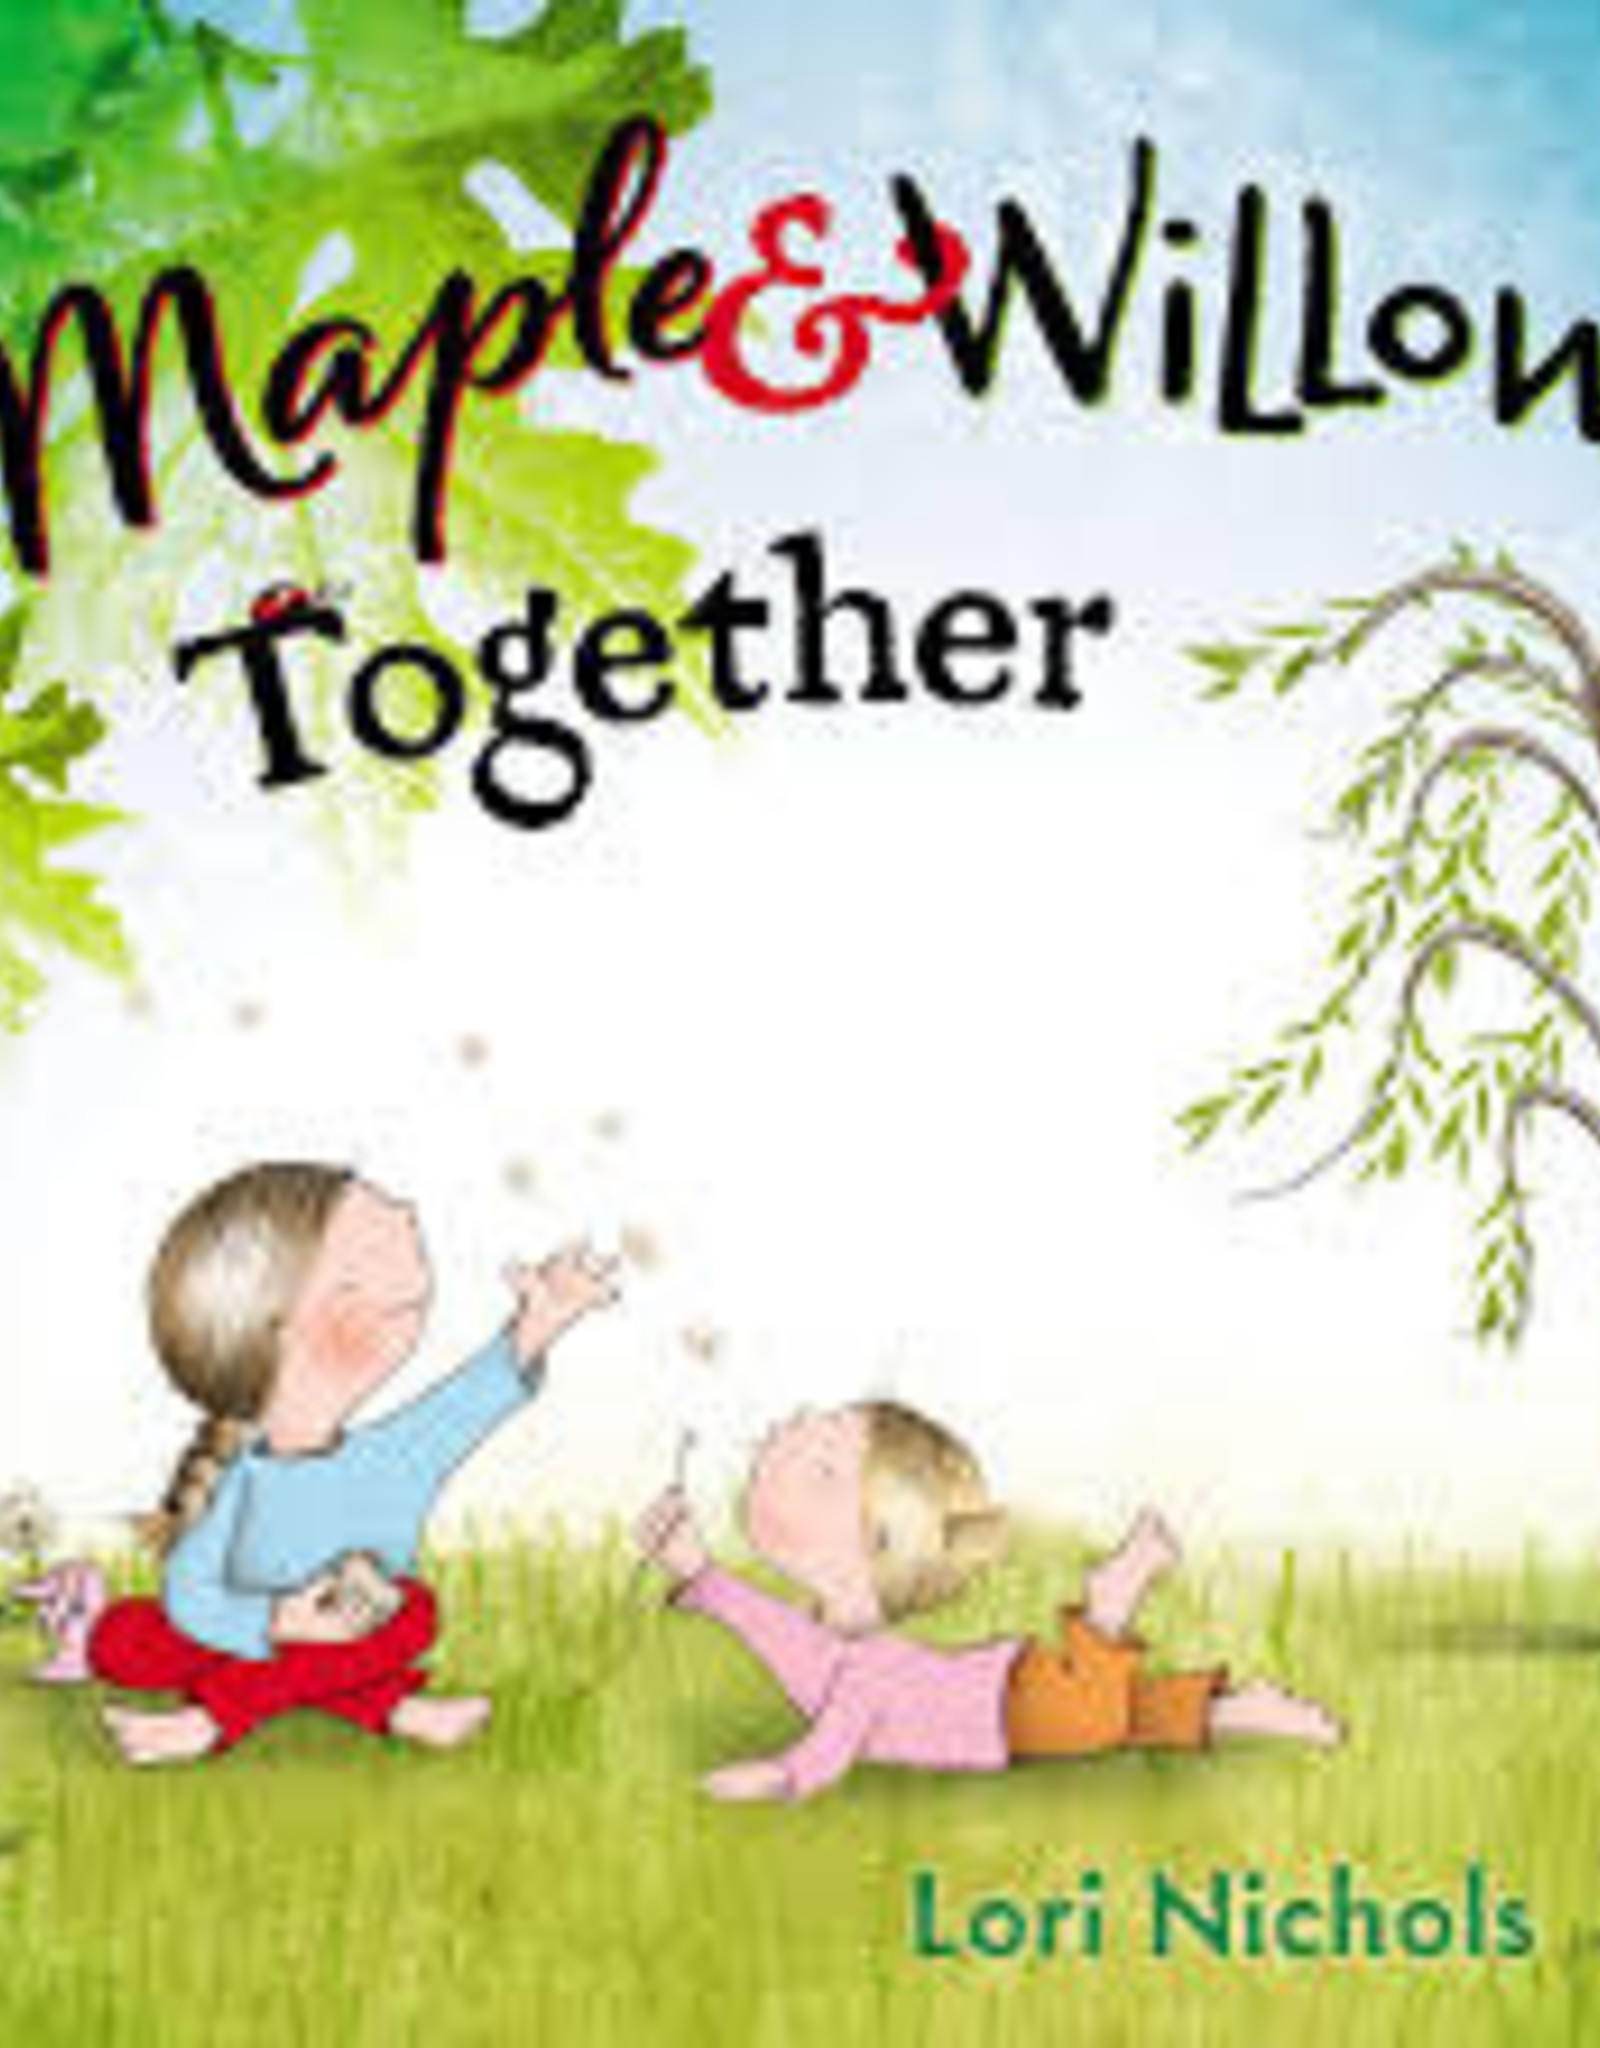 Random House/Penguin Maple & Willow together